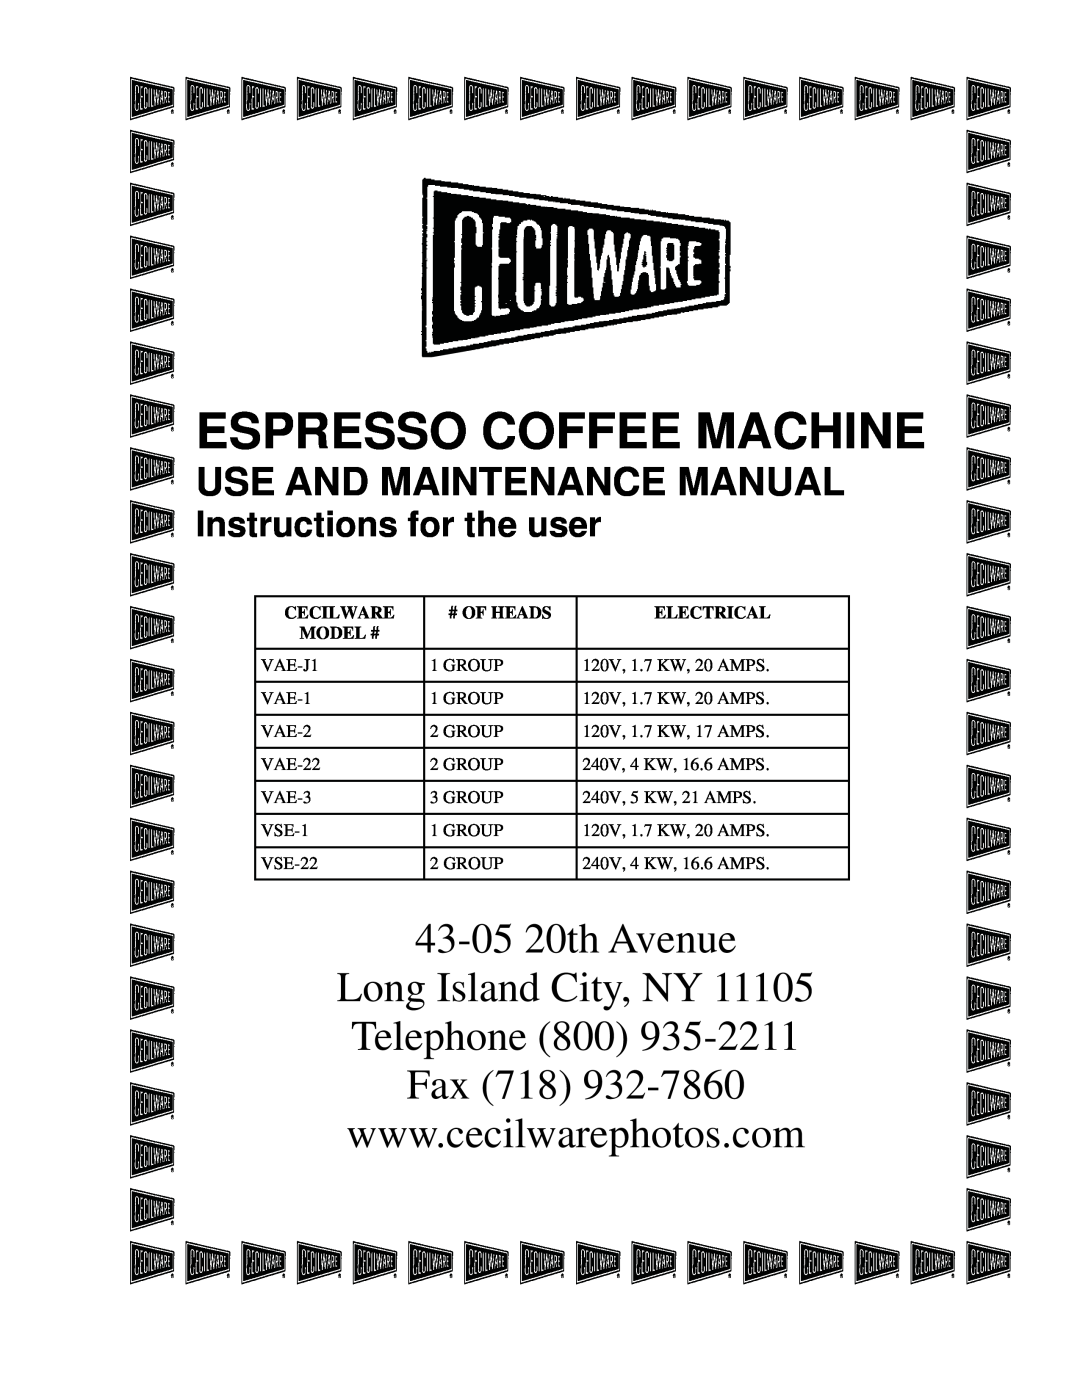 Cecilware VAE-J1 manual Instructions for the user, Espresso Coffee Machine, Use And Maintenance Manual, Cecilware, Model # 